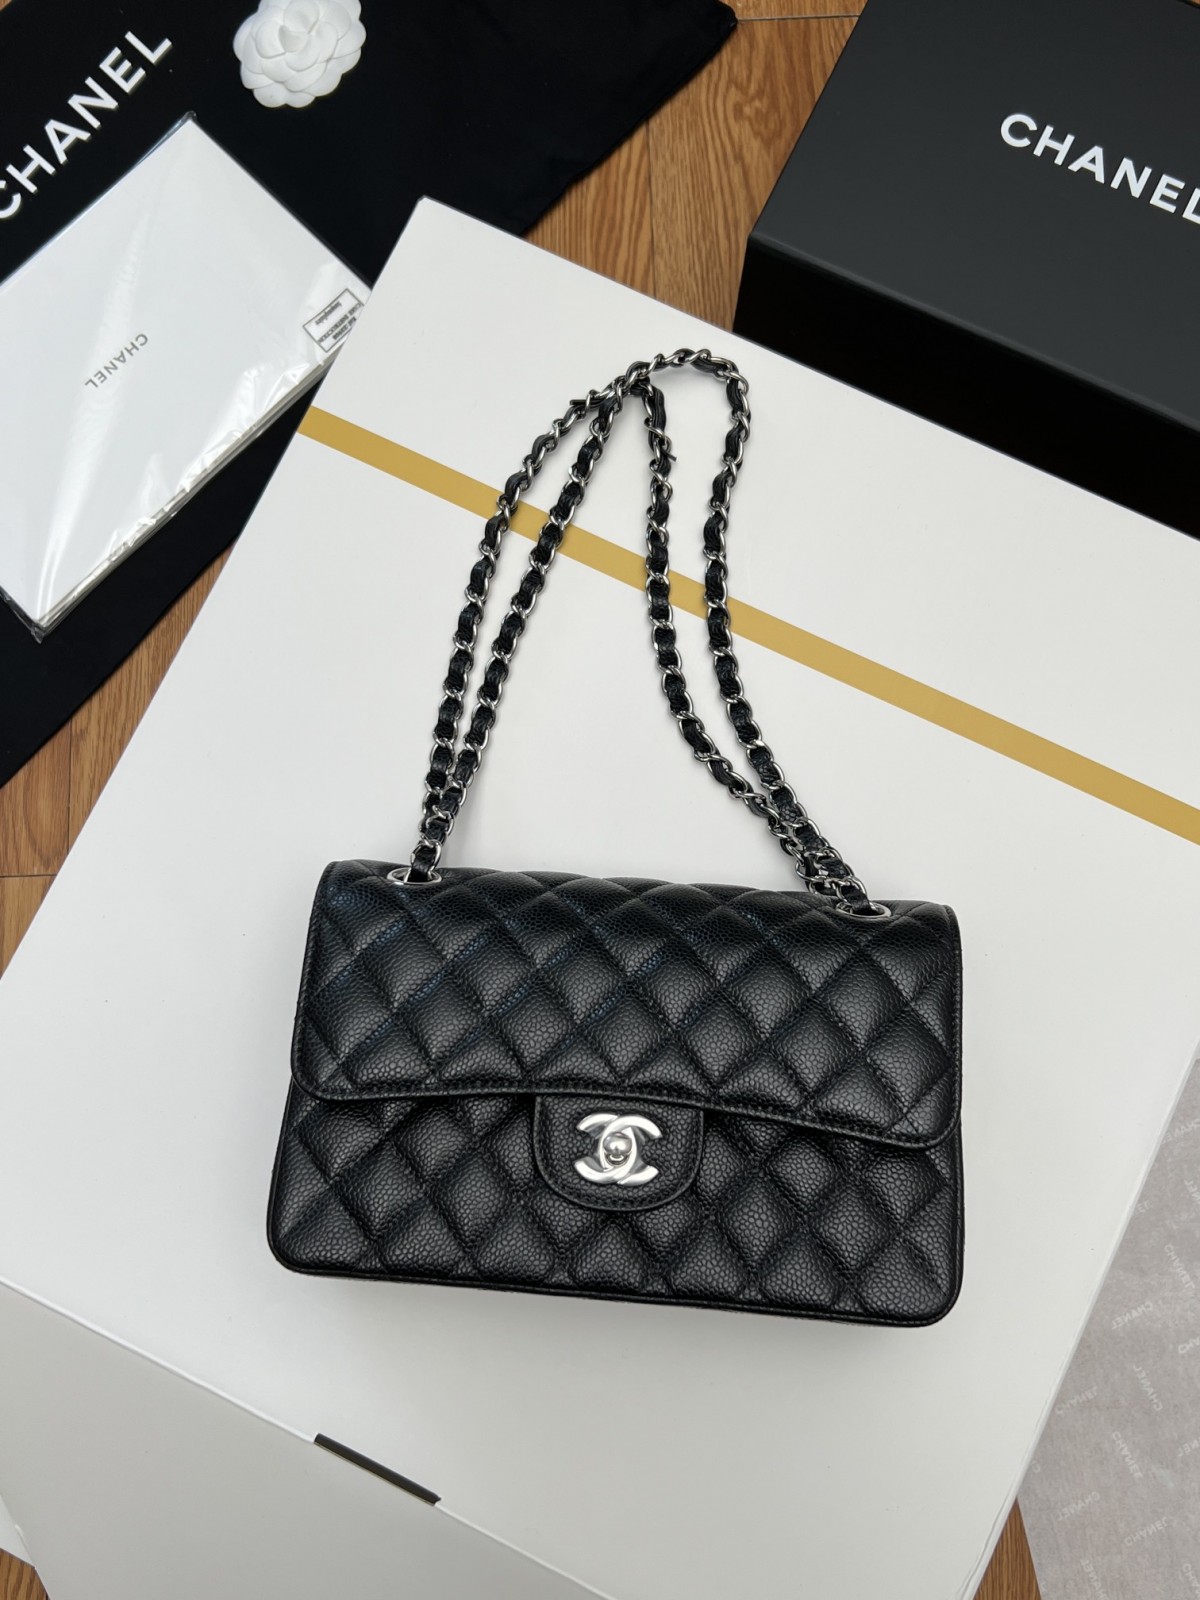 How good quality is a Shebag Chanel Classic Flap bag small size? (2023 updated)-Best Quality Fake Louis Vuitton Bag Online Store, Replica designer bag ru